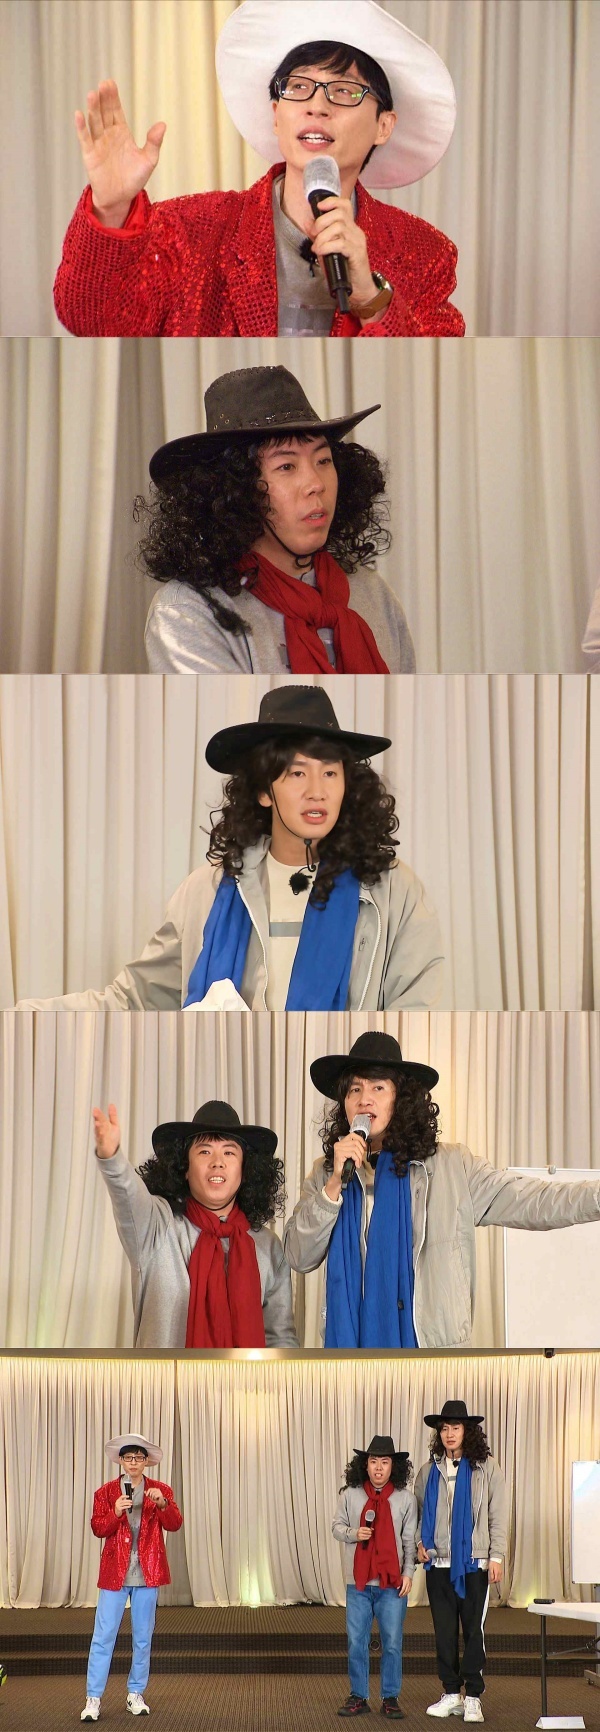 Seoul = = Yang Se-chan sang Yoo Jae-Suks Dissong to make the recording scene into a laughing sea.On SBS Running Man broadcasted on the 28th, Yang Se-chans Yoo Jae-Suk Dissong, which made Yoo Jae-Suk angry, will be released.The recent recording was divided into four representatives of entertainment agencies and six entertainers, and it was decorated with a race to wage a contract war, and it was time to boast the personal life of an entertainer belonging to the agency.Among them, Yang Se-chan decided to play Psychorus corner with Lee Kwang-soo, and he showed Yoo Jae-Suk dissemination with the lyrics of Redevelopment of Love by instant contact with Yoo Jae-Suks official assistant Heritage castle.In particular, the three previous collaborations that can not be seen anywhere have attracted great attention with the trailers that were released earlier, adding to the expectation of this broadcast.When the stage began, Yang Se-chan attacked Yoo Jae-Suk as the appearance ranking is right, and listed ugly reasons such as wrong Gorizia.Even when Yoo Jae-Suks physical defects were touched, the stage eventually stopped, and Yoo Jae-Suk said, I will prepare for the lawsuit! I can not do entertainment in the future!, and made the scene laugh.On the other hand, Jesse, who was a guest on the day, presented a new song What X stage, 2PM Wooyoung made an atmosphere with random music dance, and Song Ji-hyo presented a variety of attractions by showing his unique personal period proving his luck as Gold Son Ji Hyo.Yang Se-chans dissemination, which even called for the declaration of Yoo Jae-Suks suspension of activities, can be found on Running Man, which is broadcasted at 5 pm on the 28th.